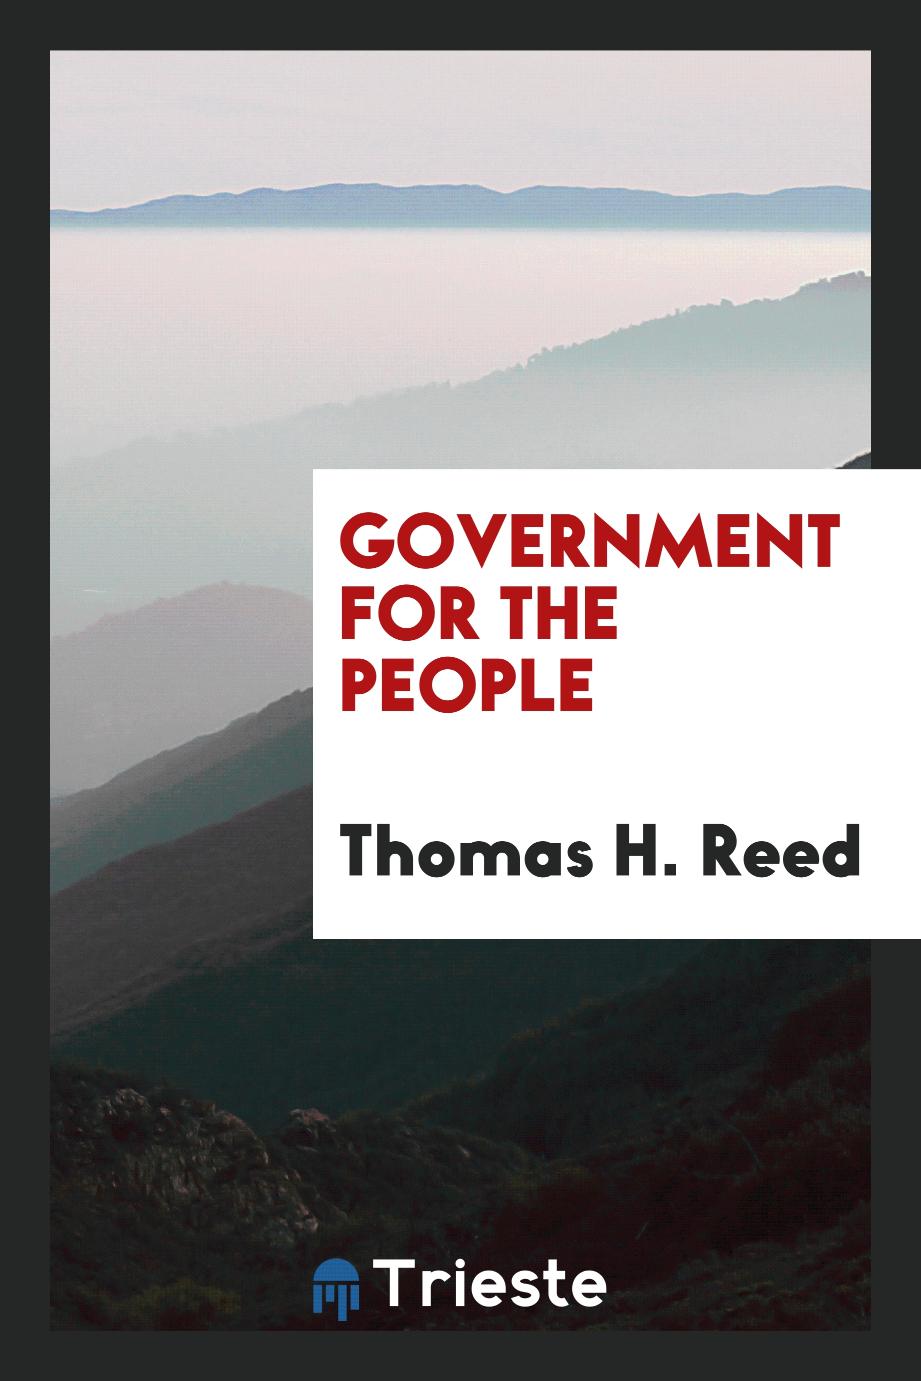 Government for the people